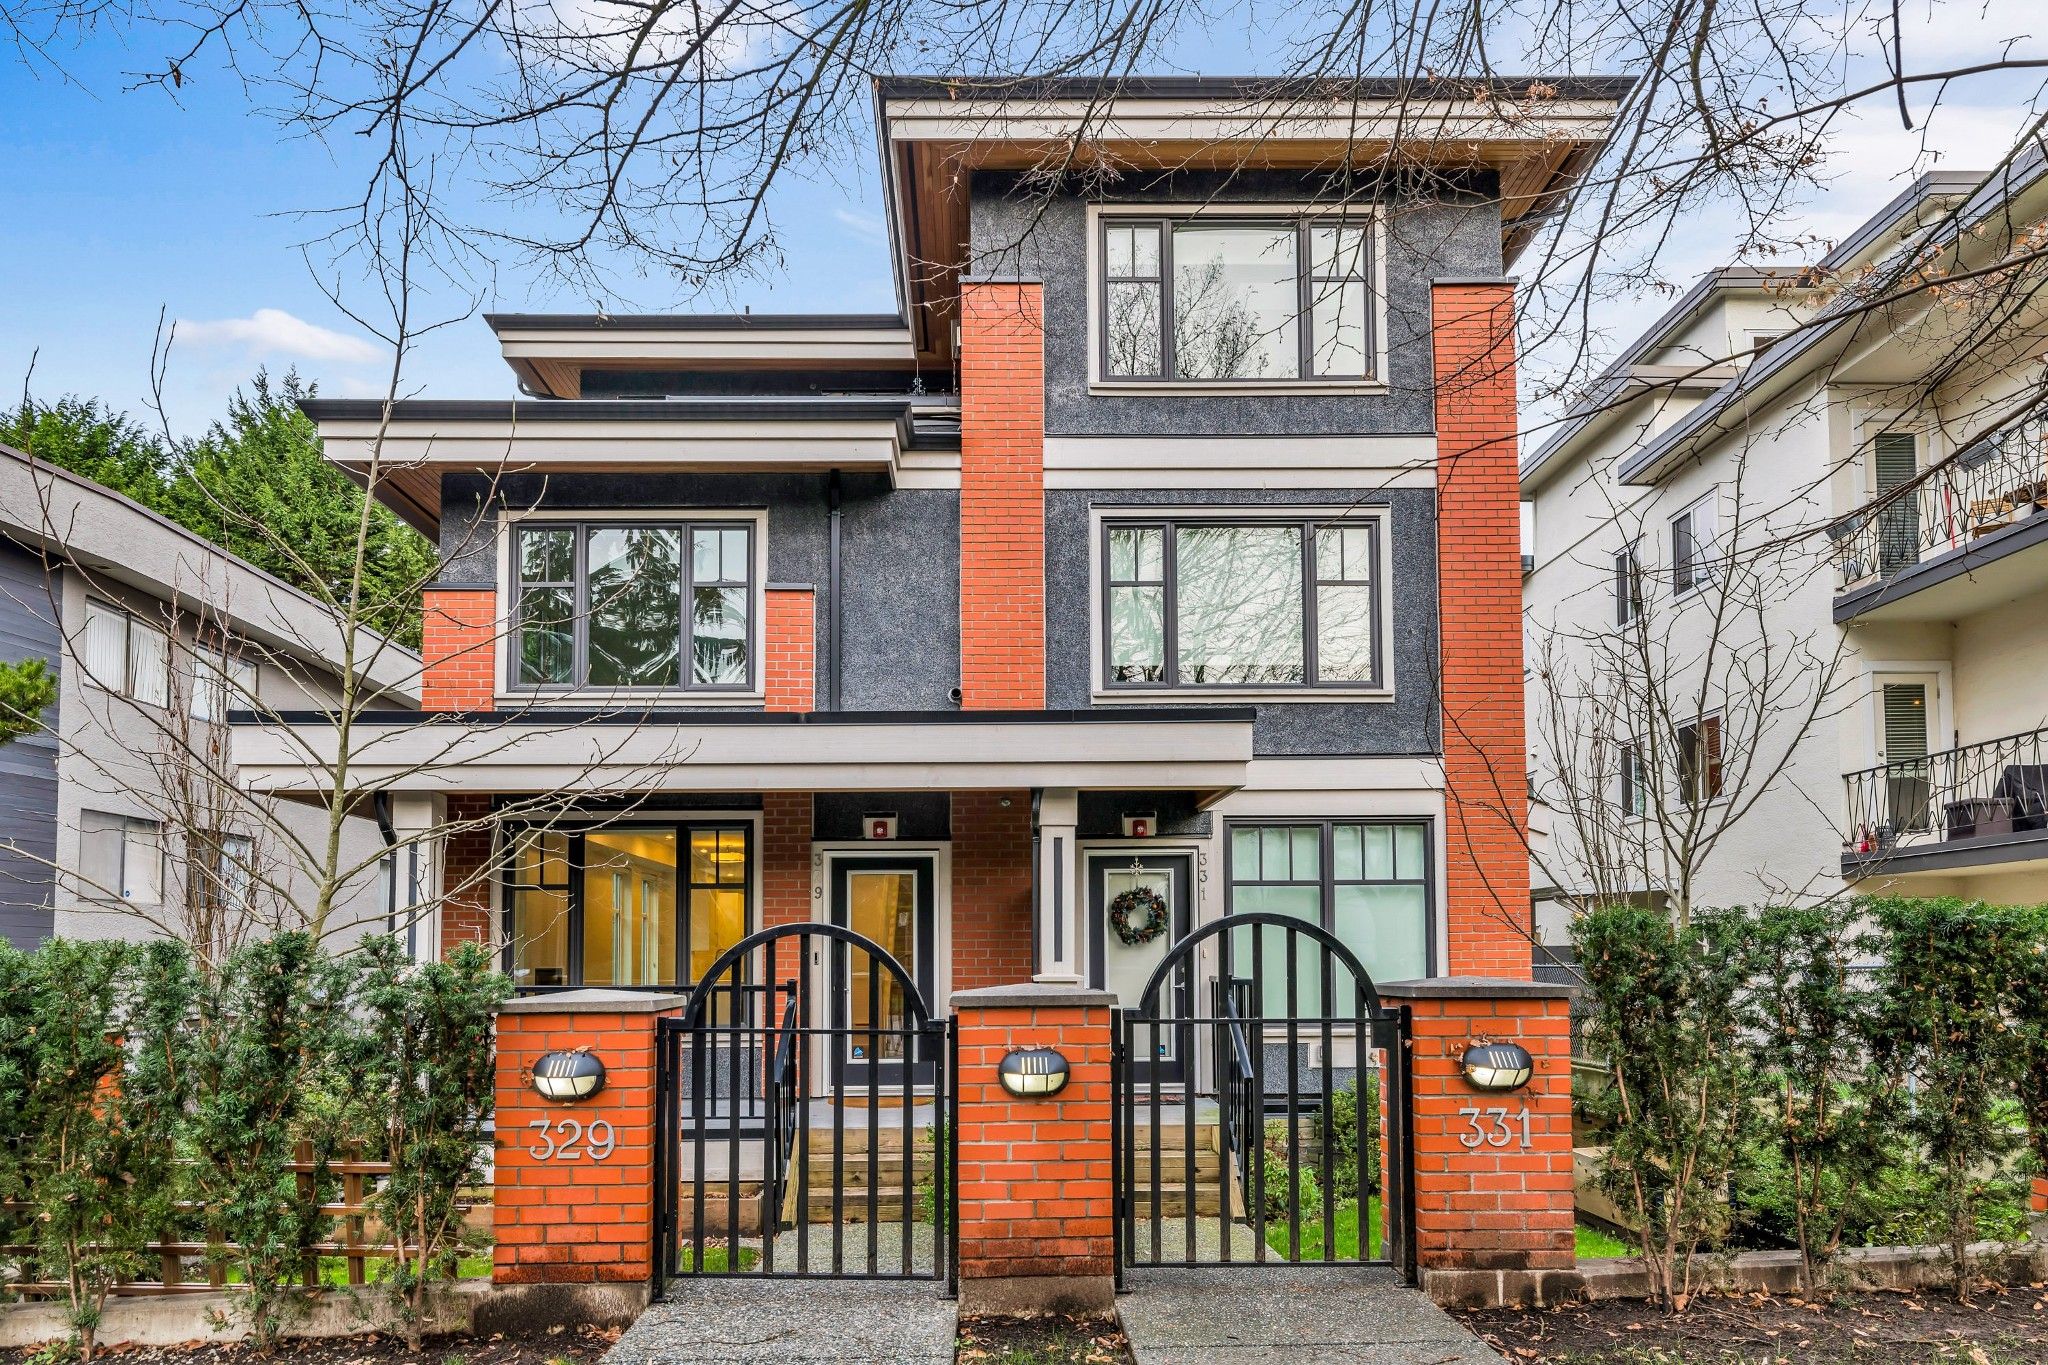 Main Photo: 329 E 7TH Avenue in Vancouver: Mount Pleasant VE Townhouse for sale (Vancouver East)  : MLS®# R2428671